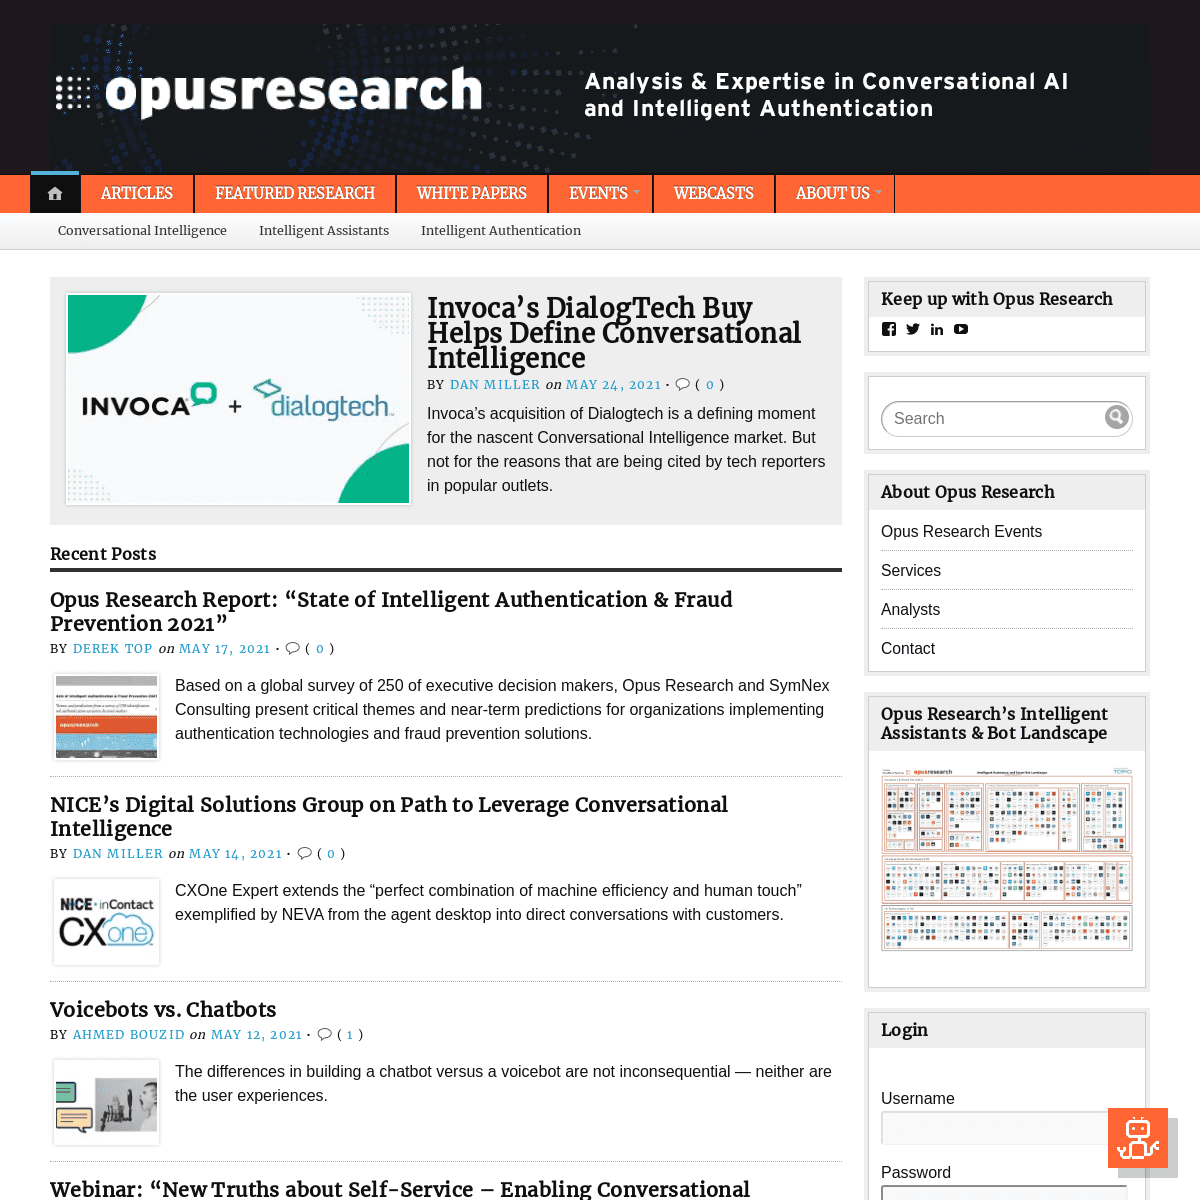 A complete backup of https://opusresearch.net